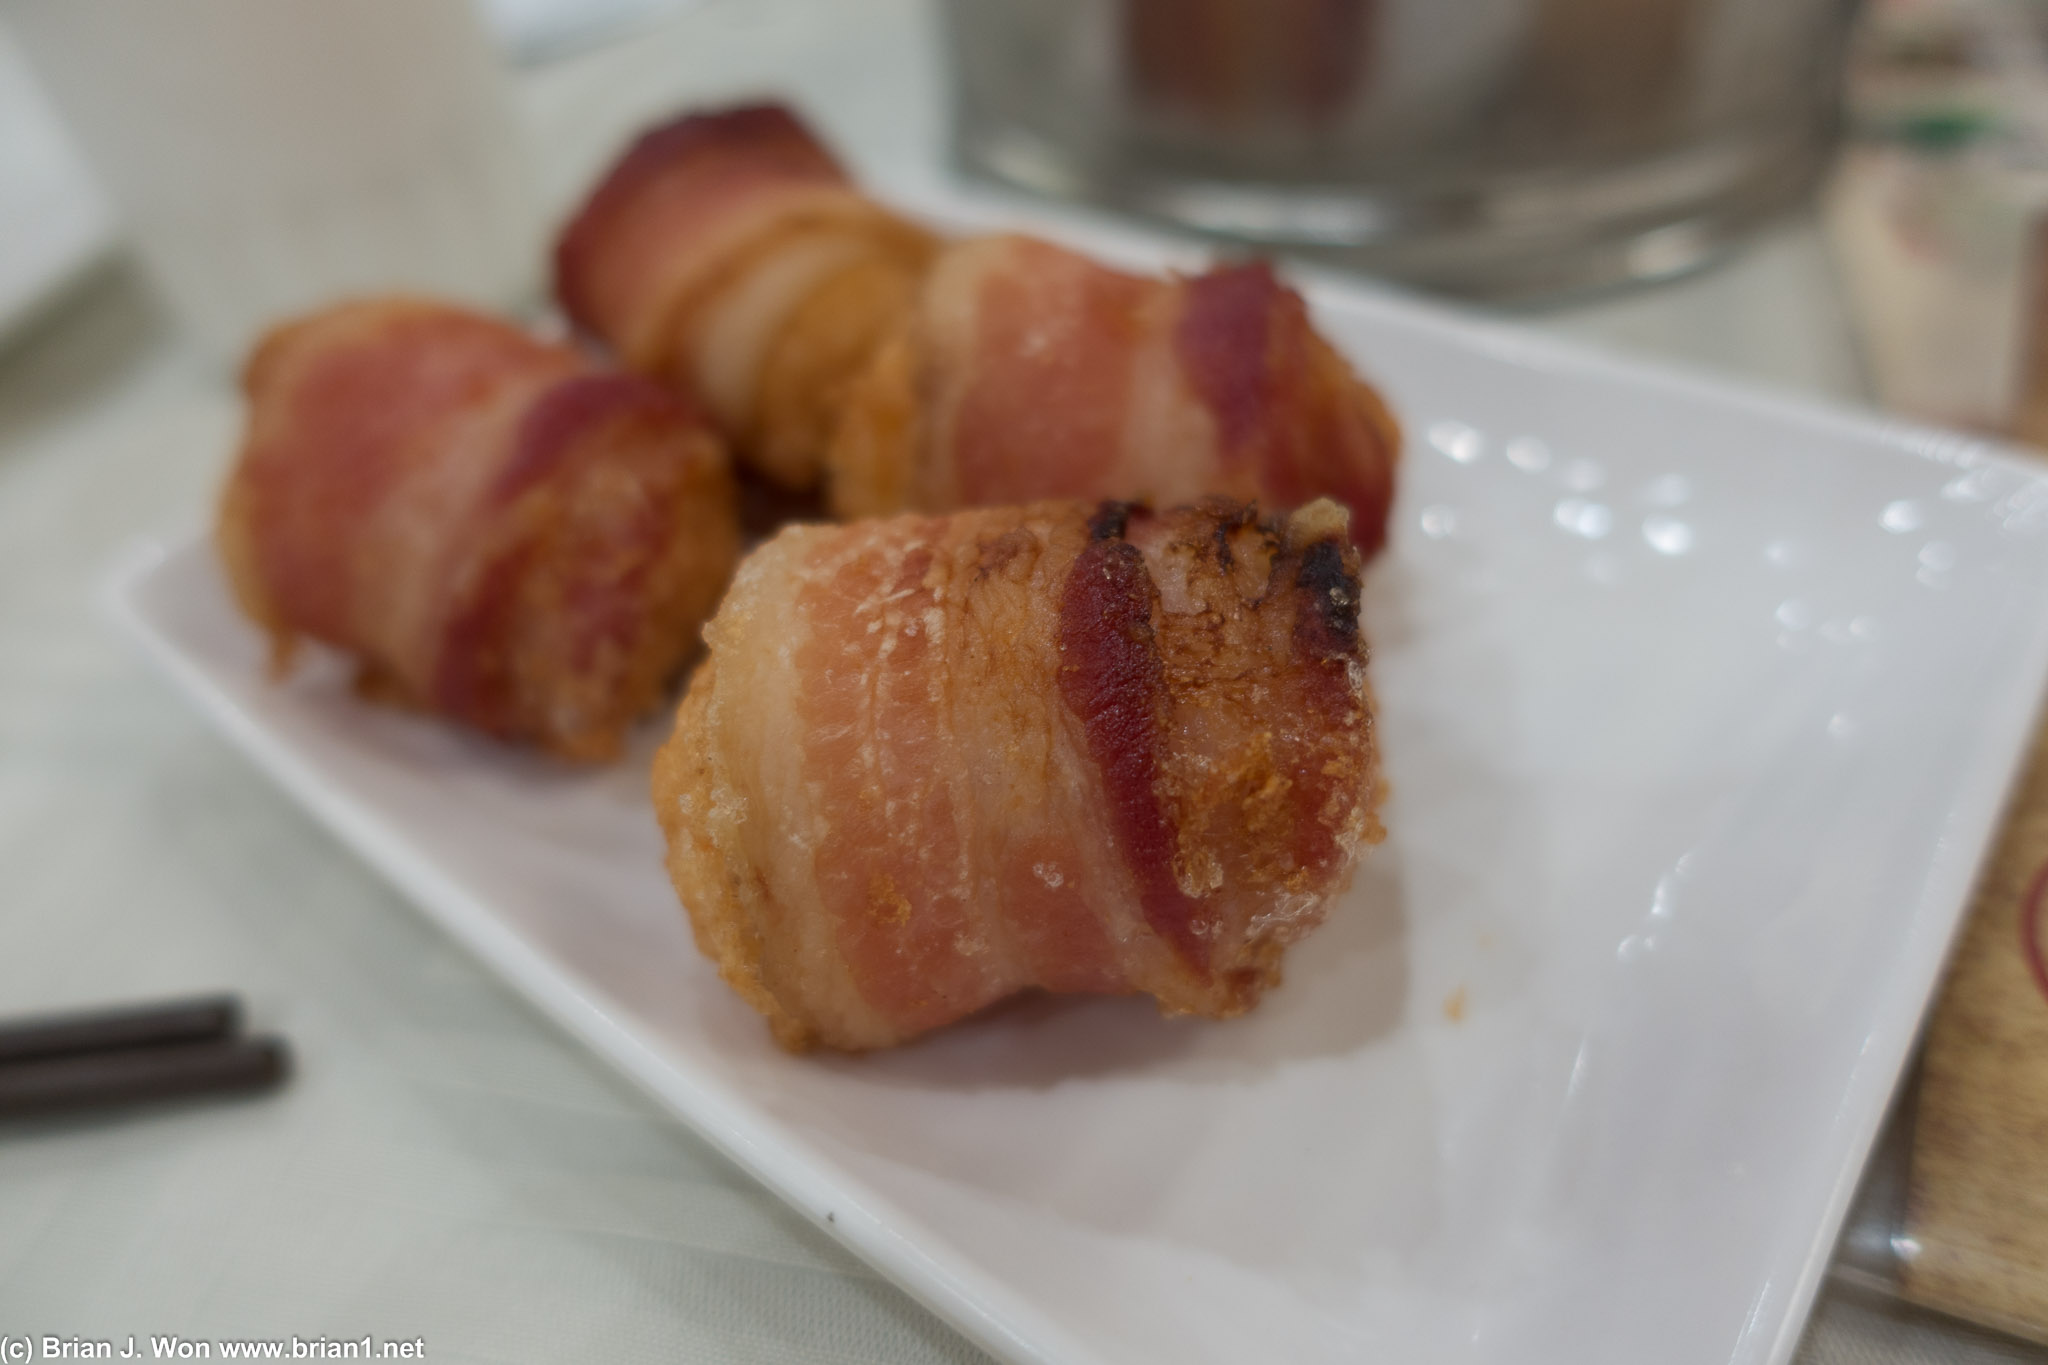 Bacon-wrapped shrimp ball. Quite decent, and almost bite-sized.